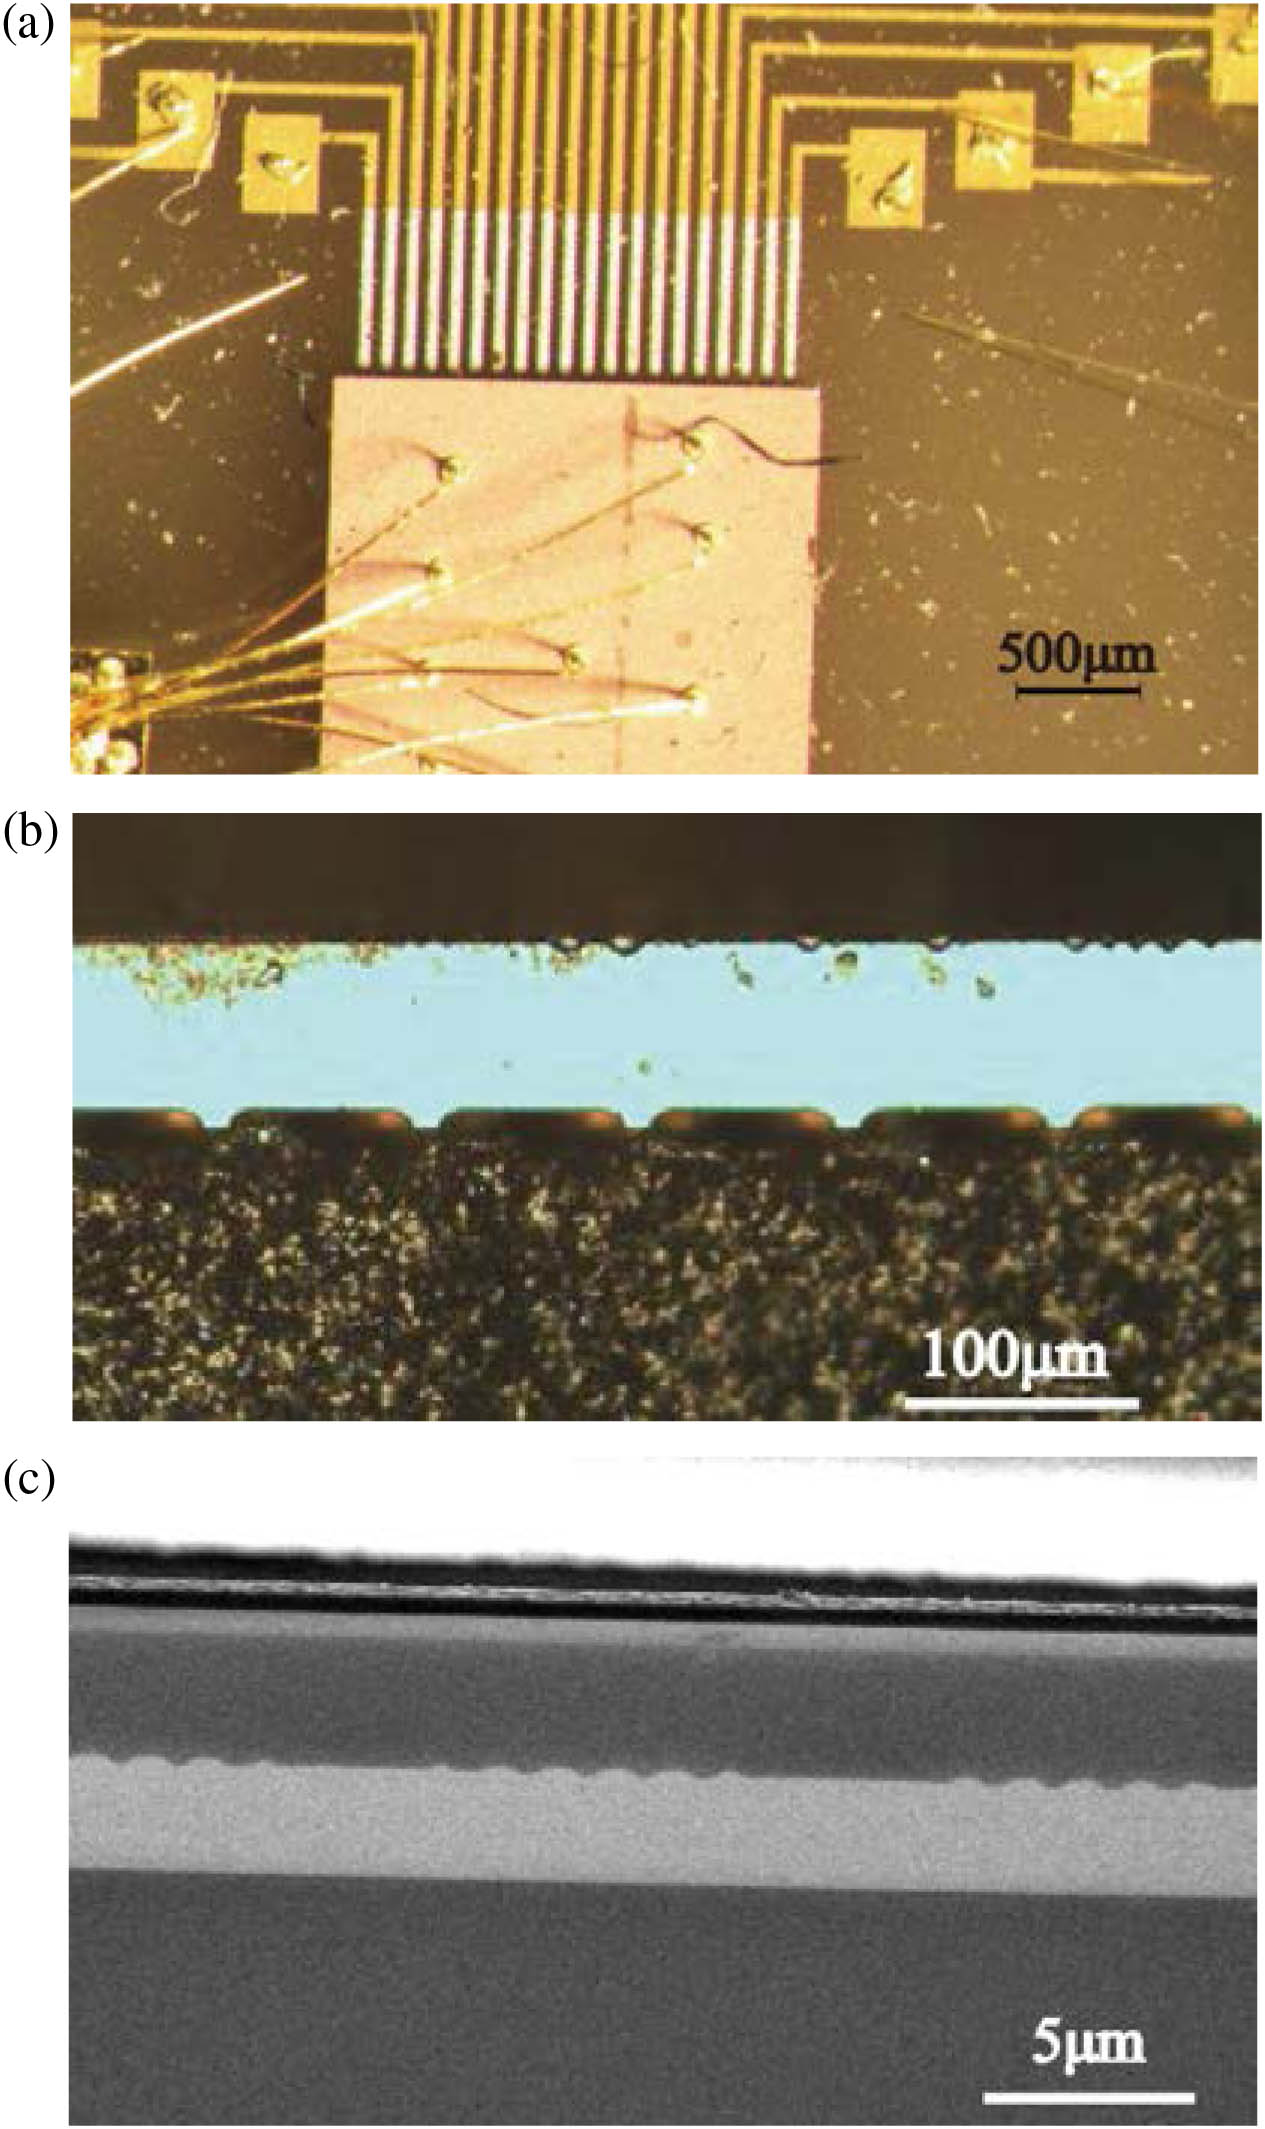 (a) Optical microscope image of SBG-QCL array bonded on patterned AlN submount; (b) magnified view of the front facet of the array; (c) SEM image of the sampled grating.